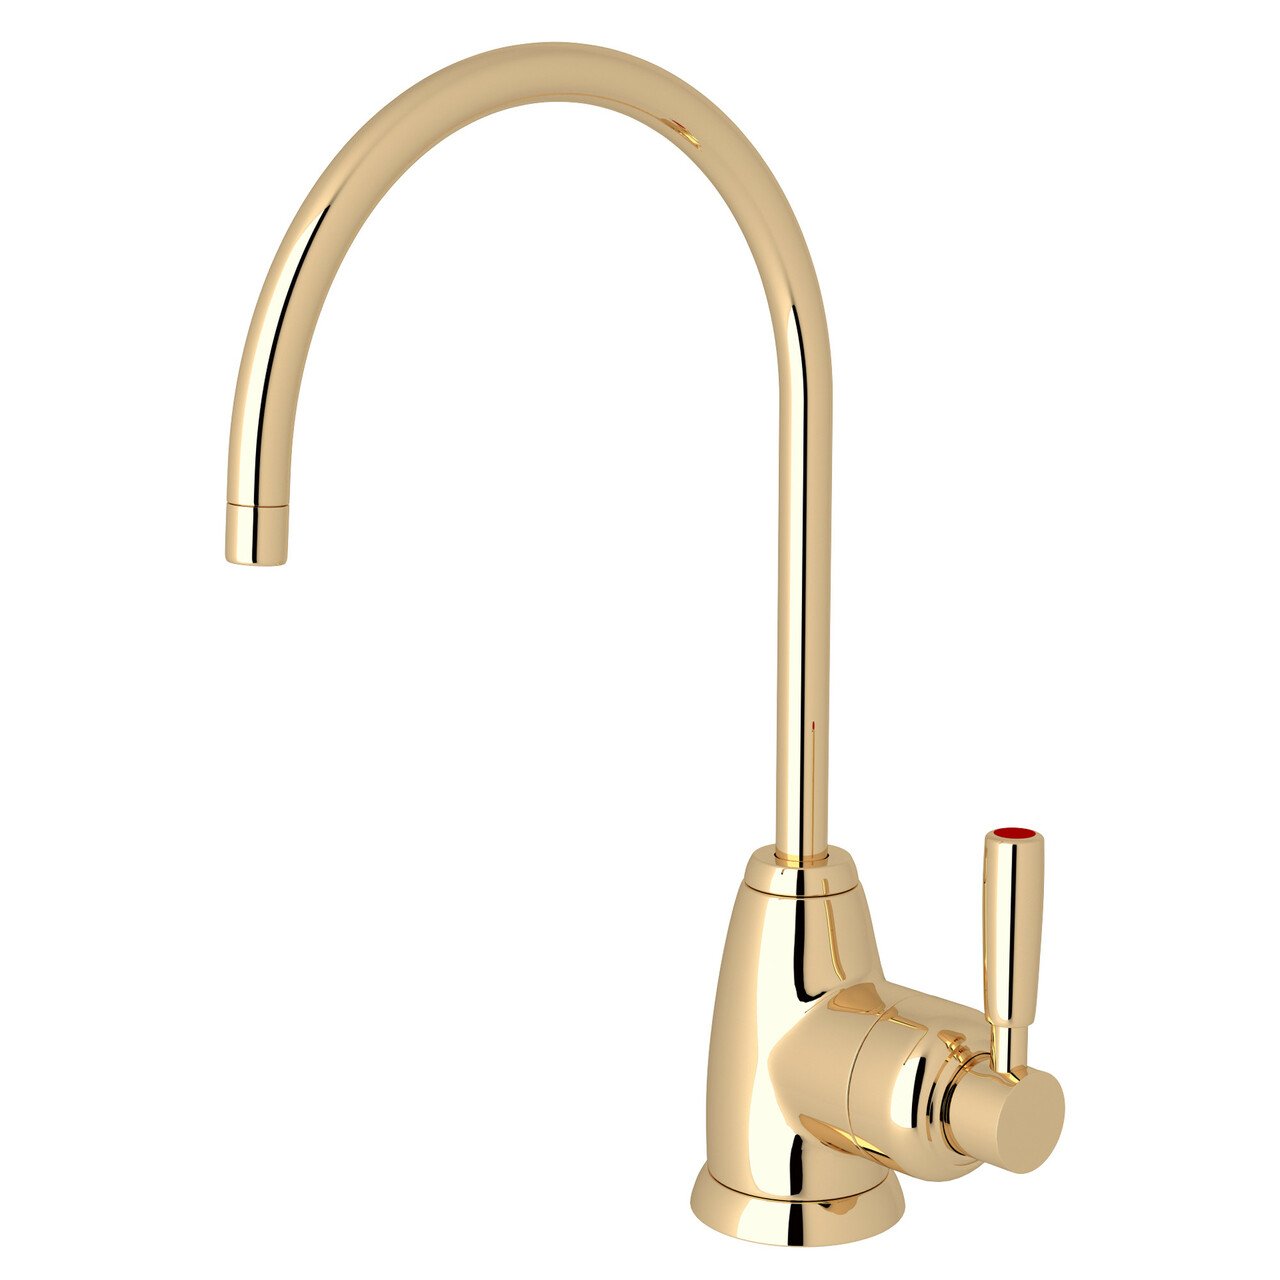 Perrin & Rowe Holborn C-Spout Hot Water Faucet - BNGBath